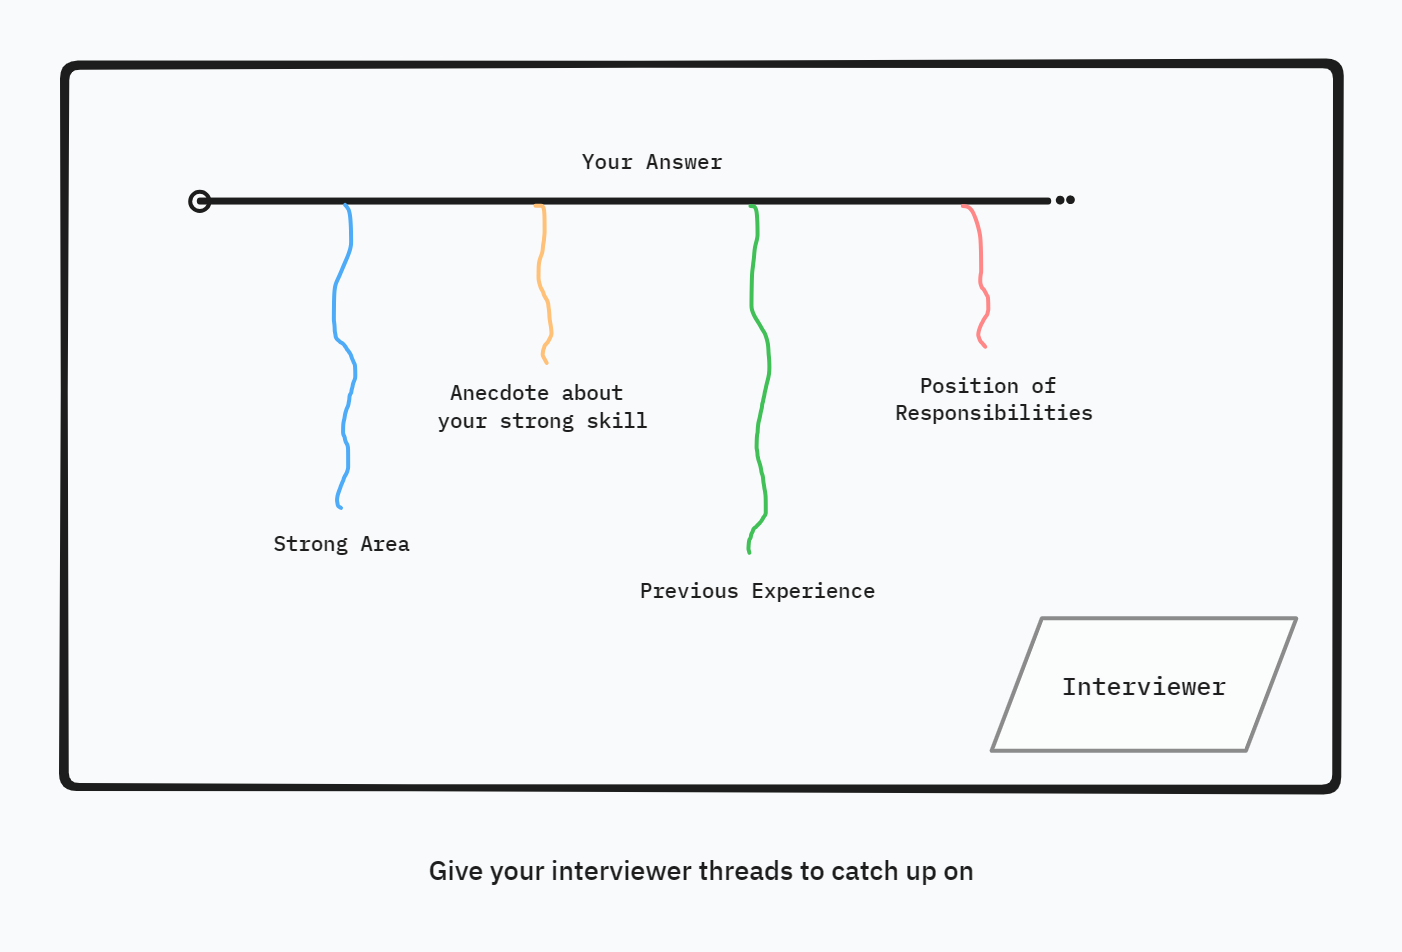 Threads of information for the interviewer to hang on